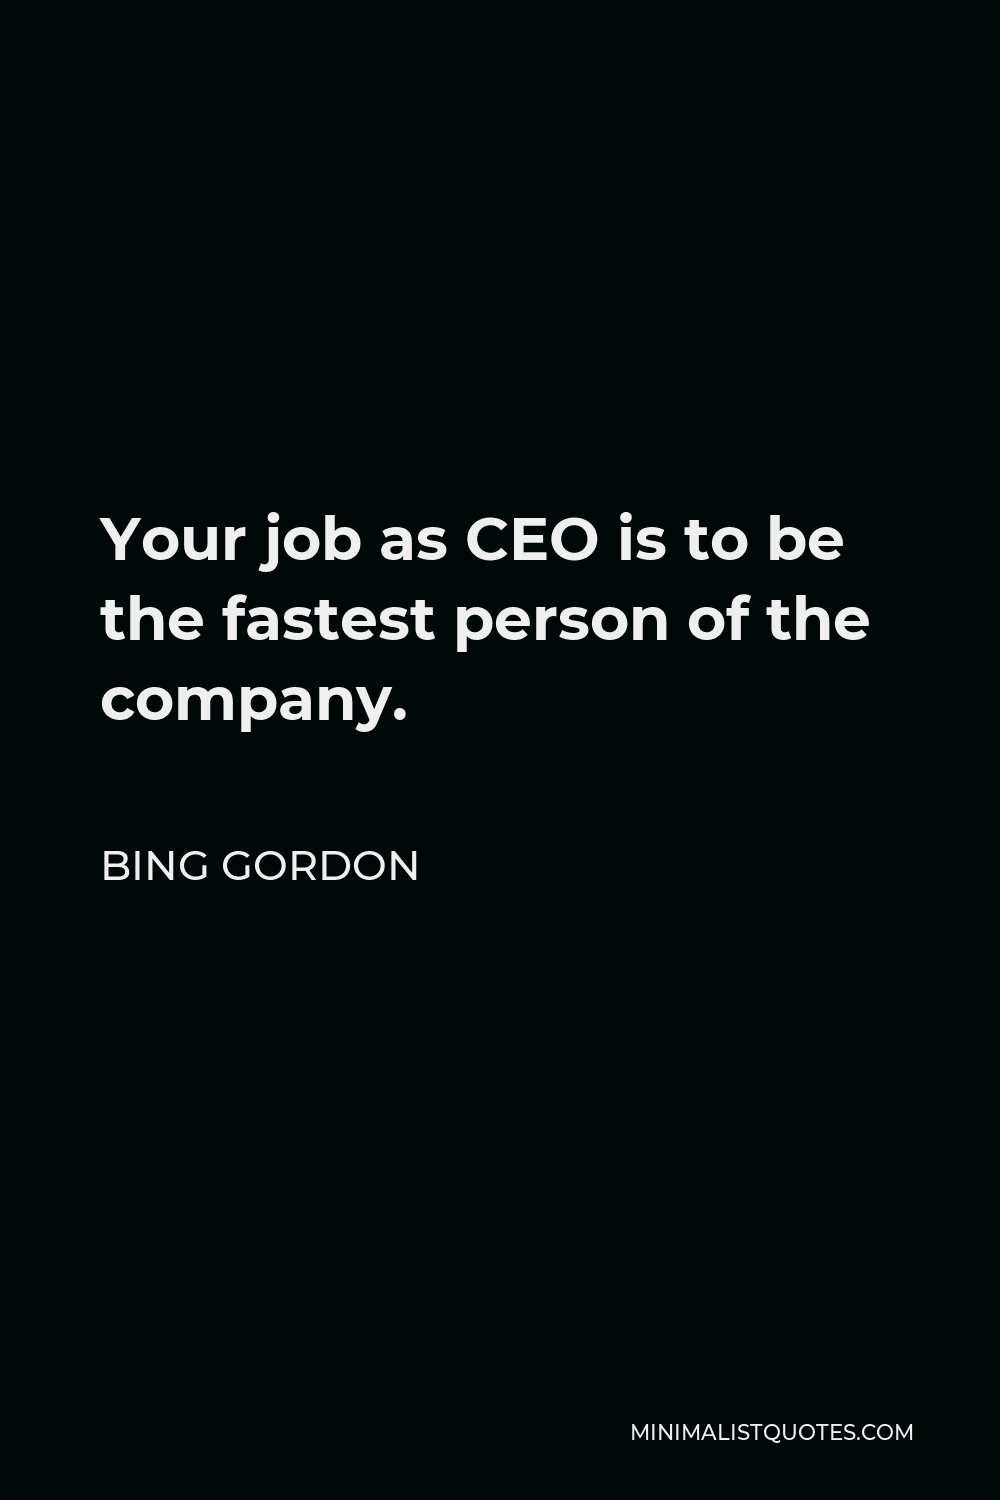 Bing Gordon Quote - Your job as CEO is to be the fastest person of the company.